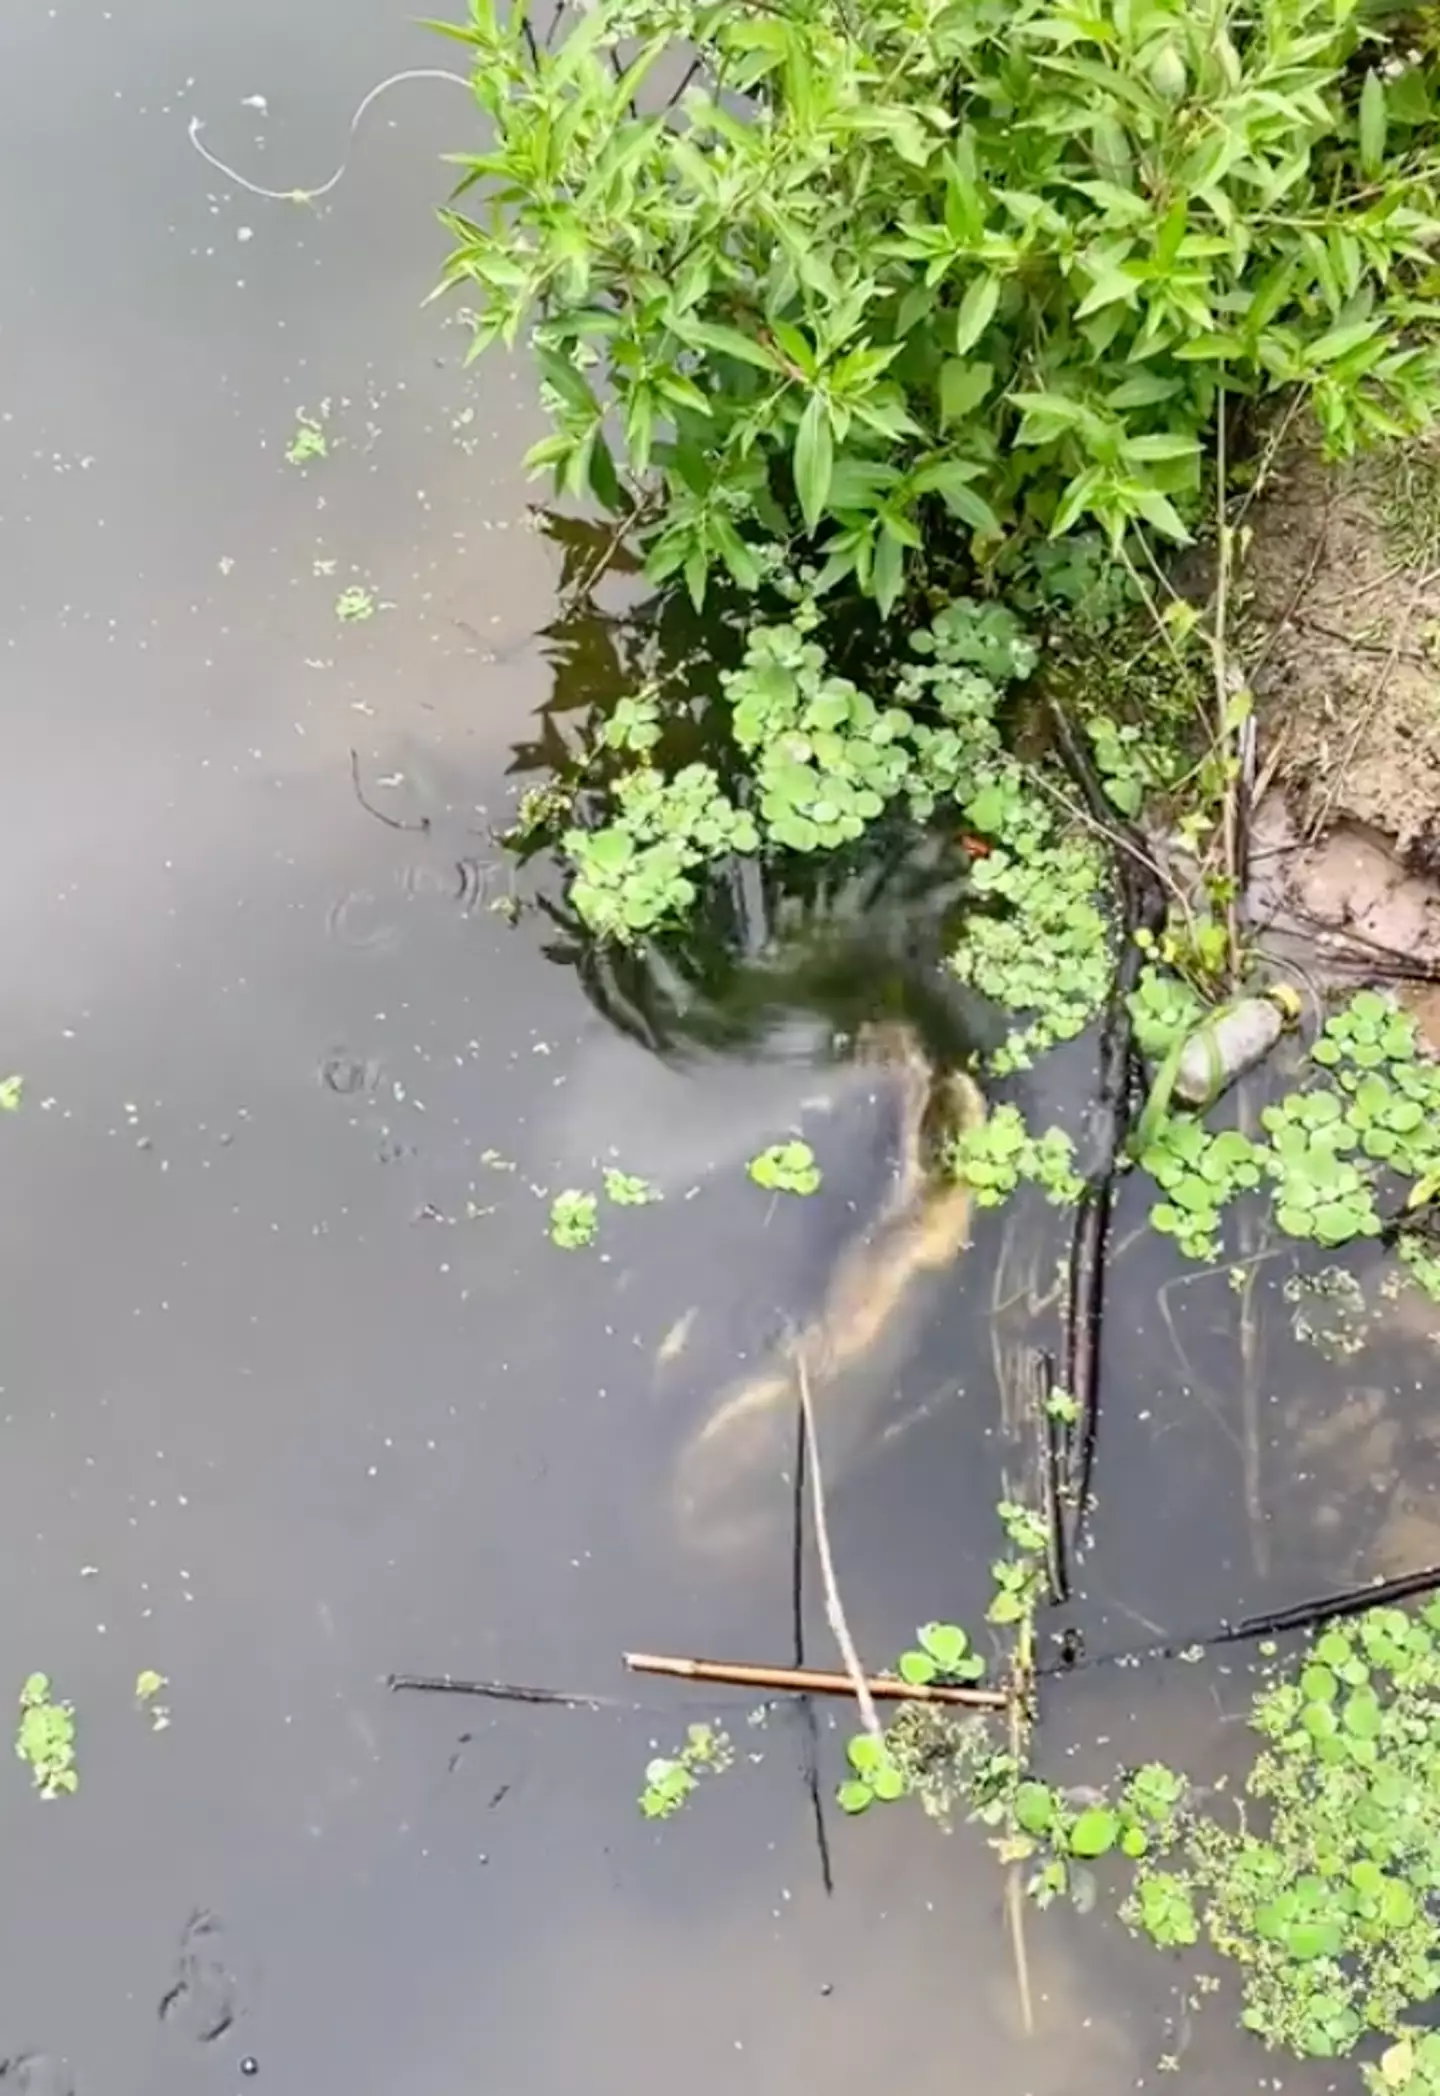 The gator only becomes visible just before breaking the surface.